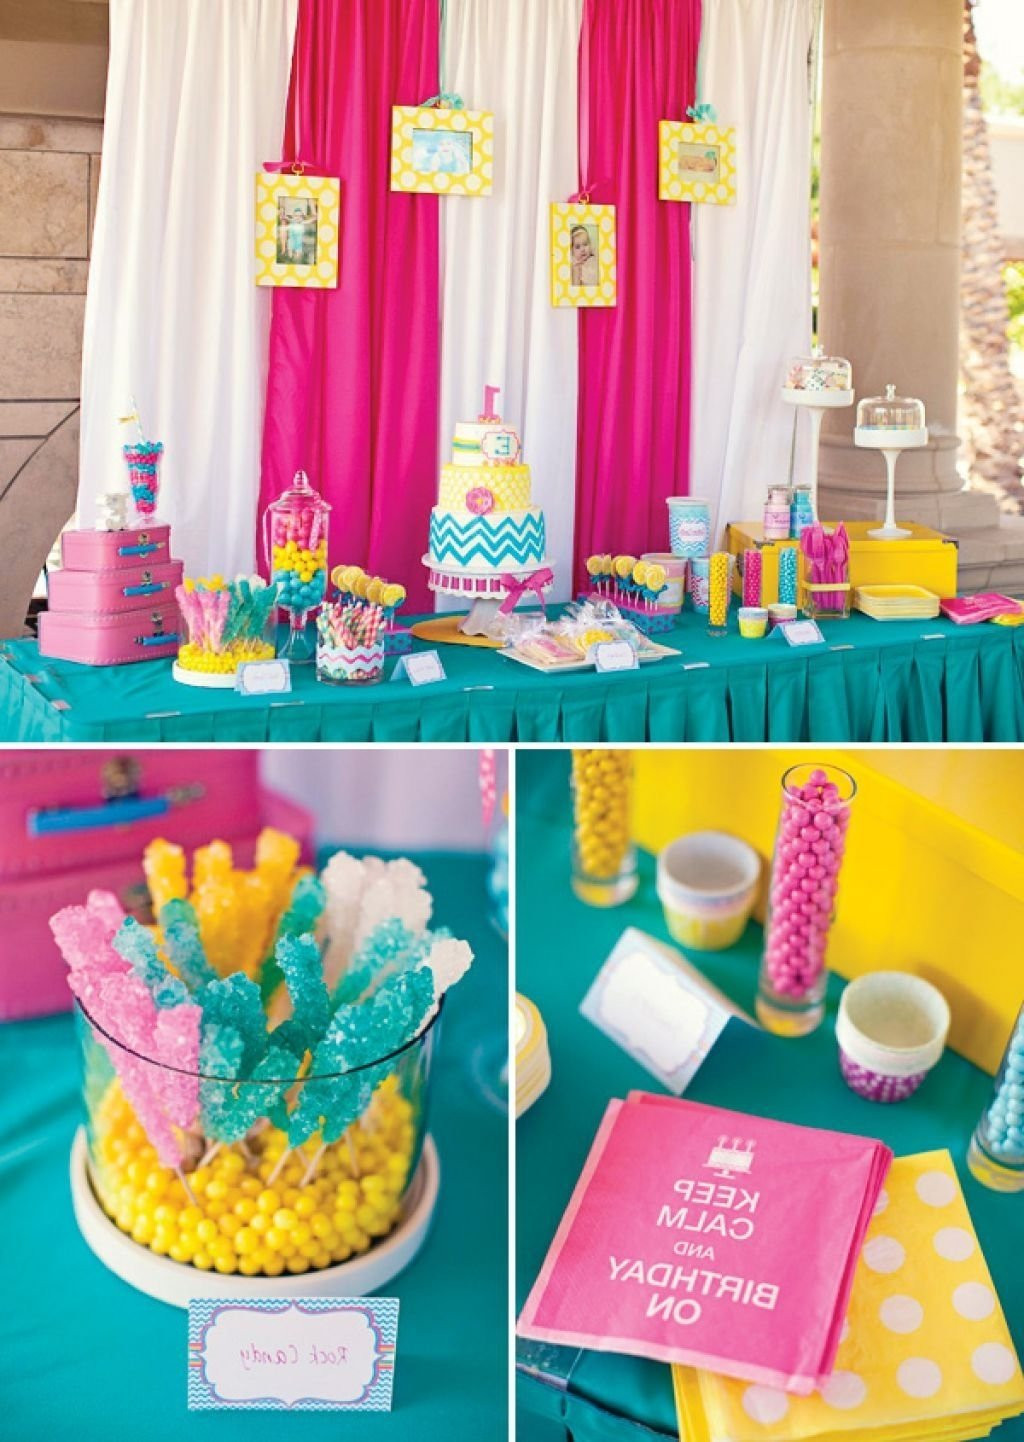 Winter Birthday Party Ideas For 3 Year Olds
 10 Lovely Birthday Party Ideas For 3 Yr Old Girl 2019